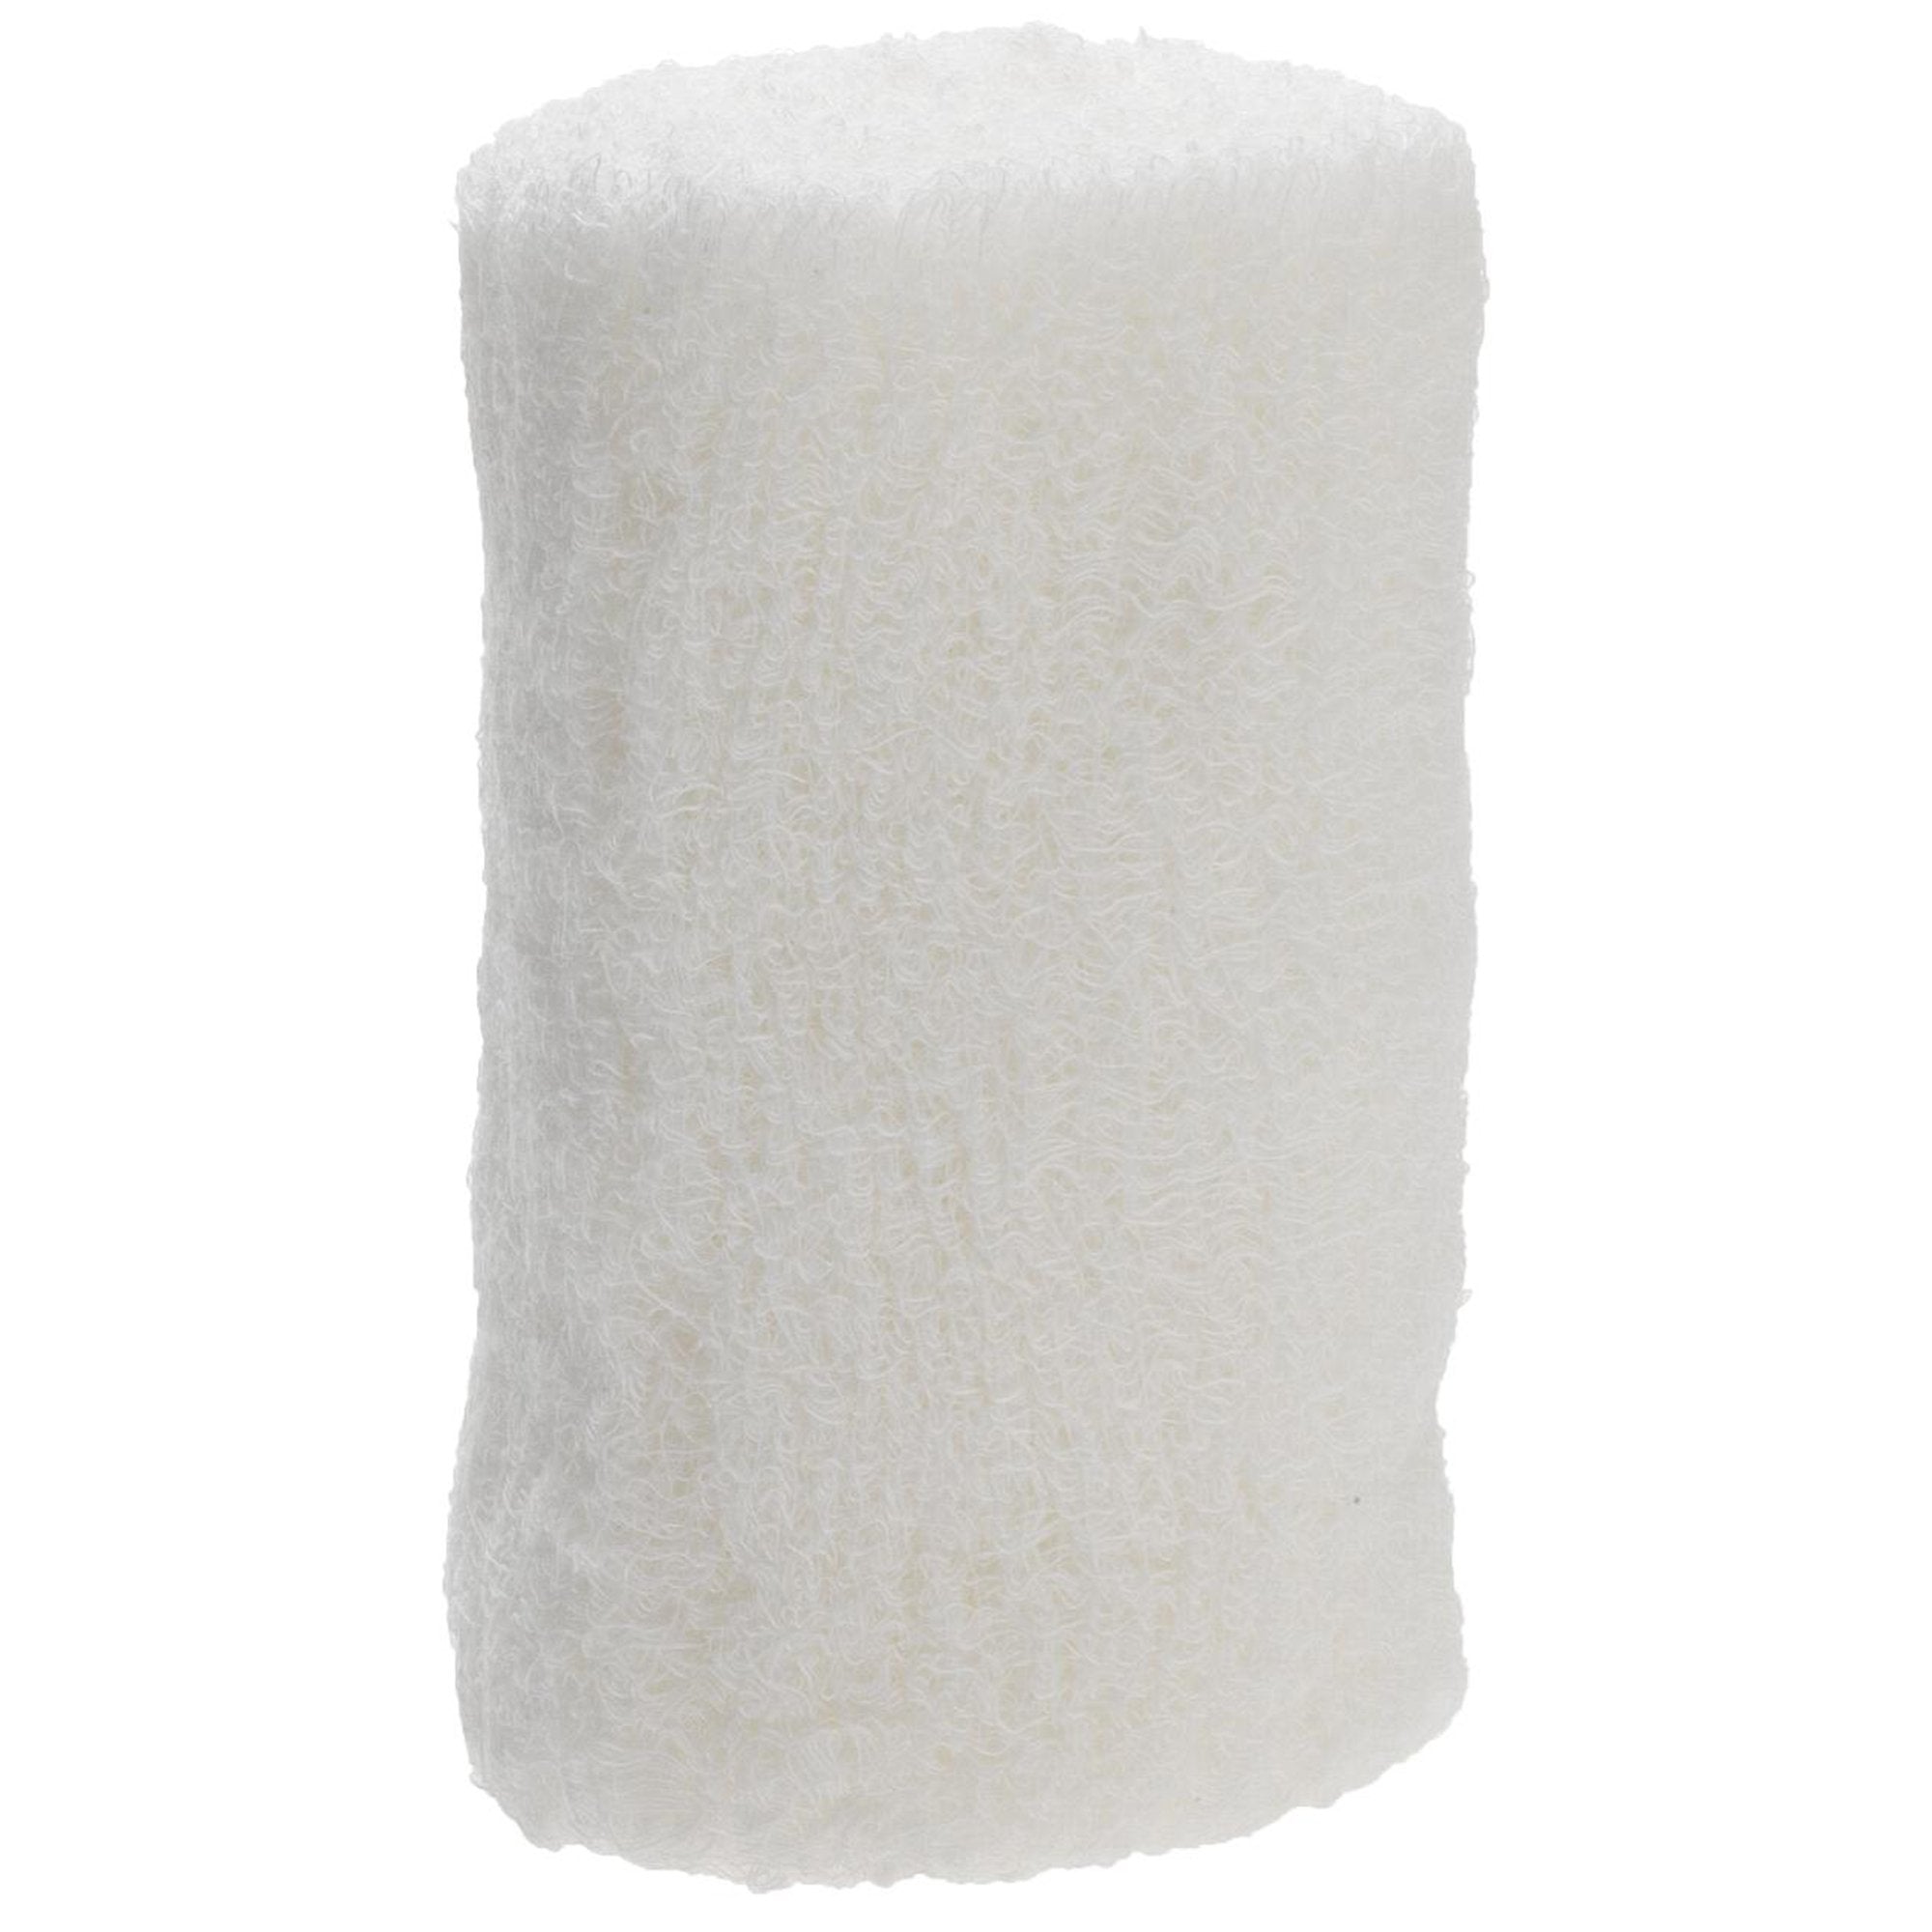 Conforming Bandage Dermacea™ 4 Inch X 4-1/10 Yard 12 per Pack NonSterile 1-Ply Roll Shape